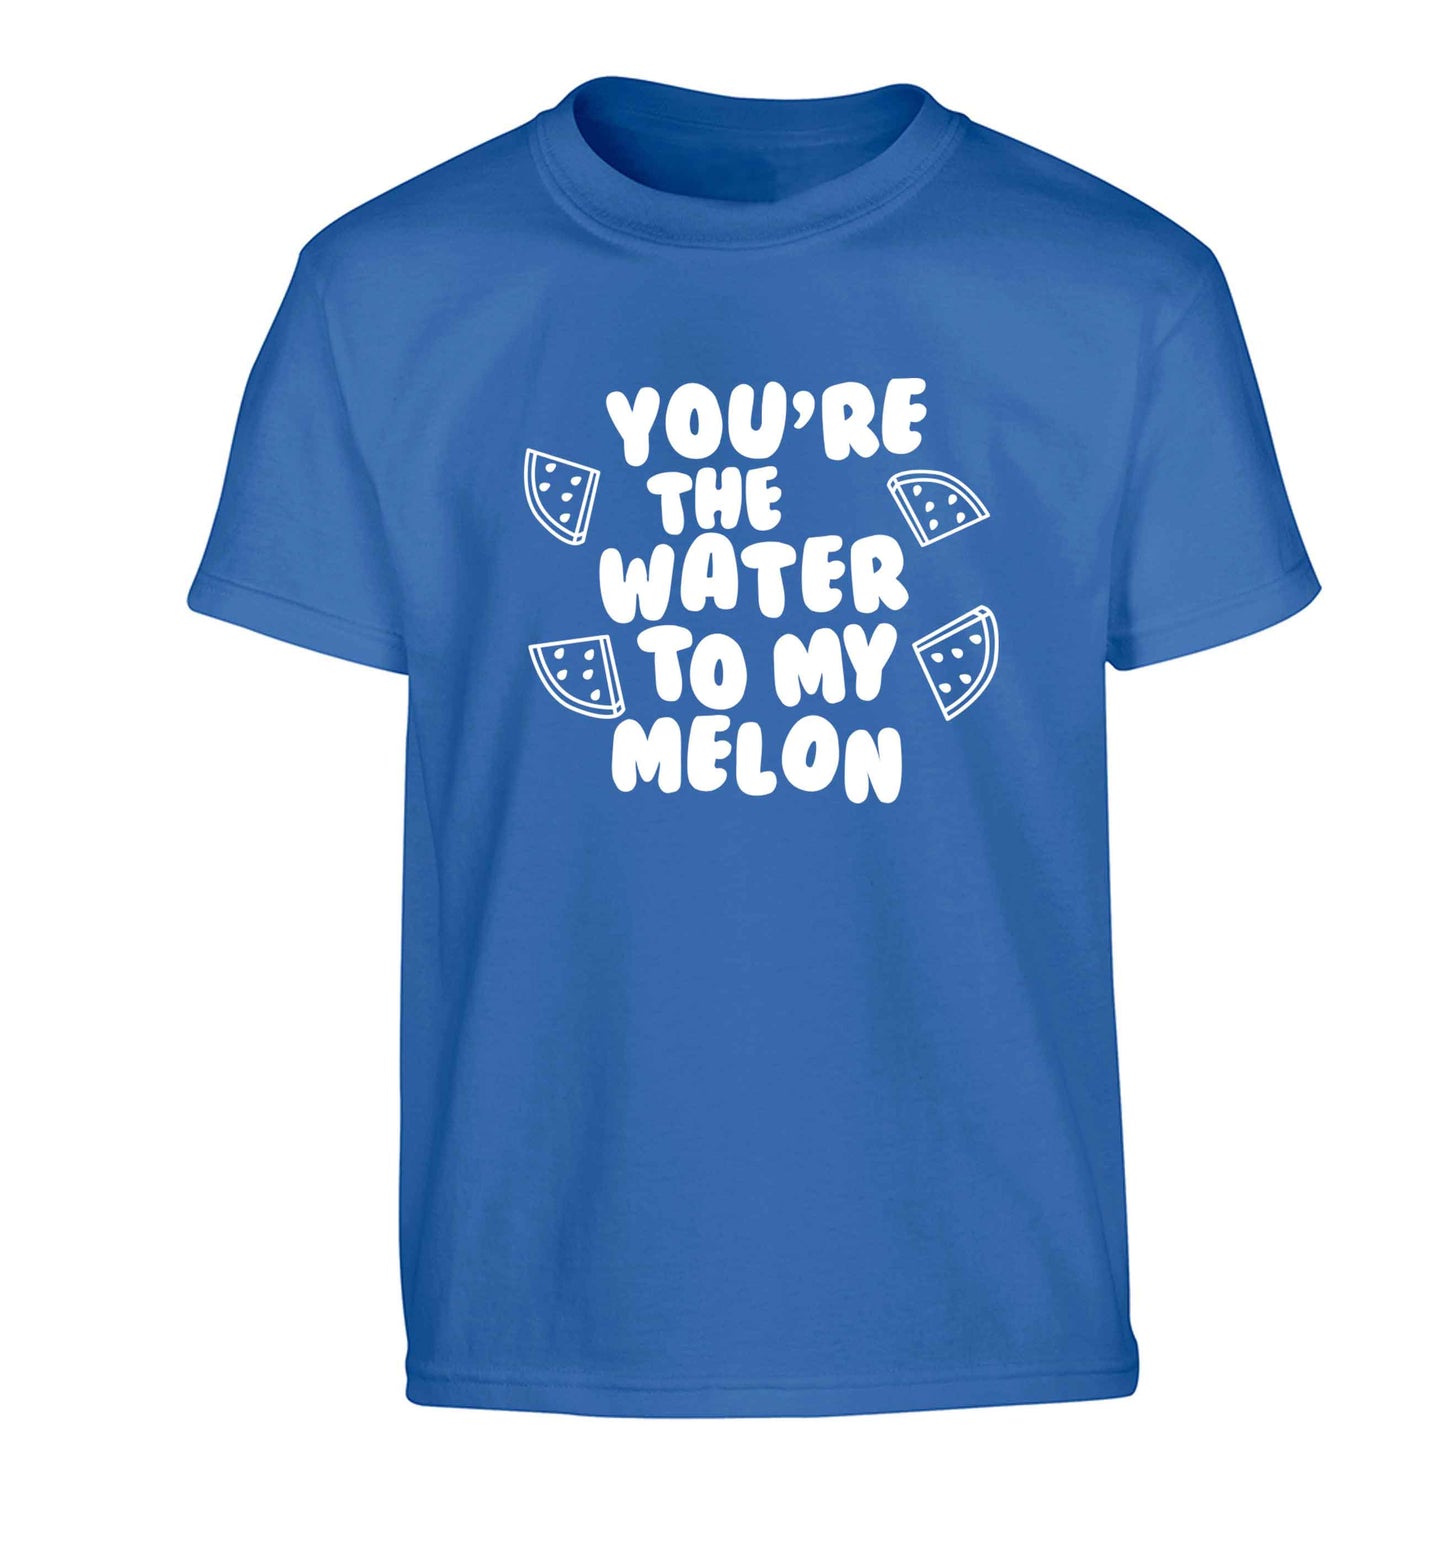 You're the water to my melon Children's blue Tshirt 12-13 Years